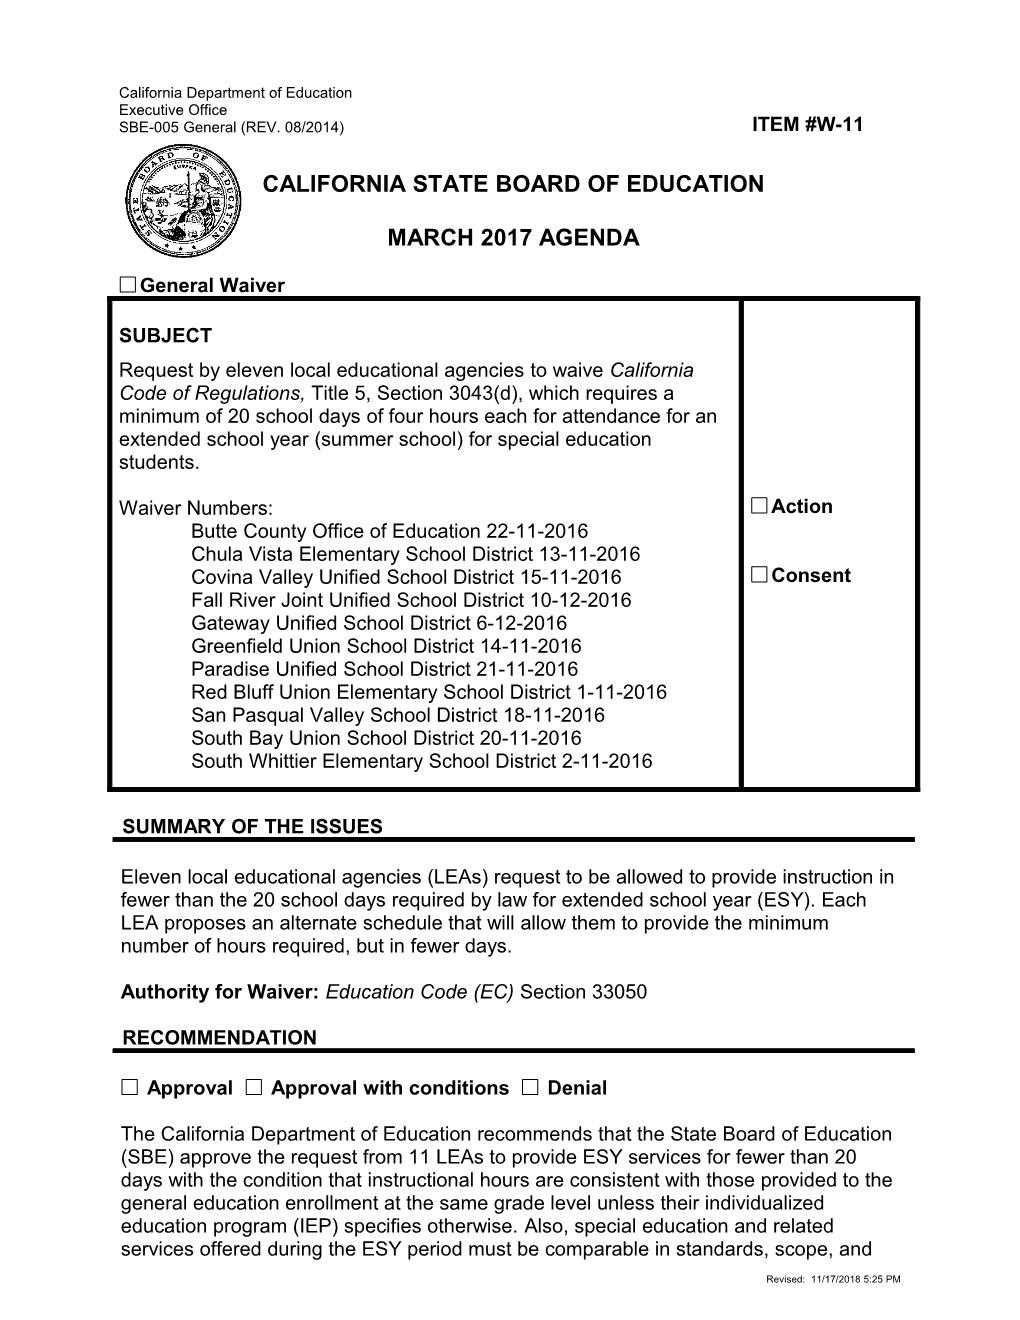 March 2017 Waiver Item W-11 - Meeting Agendas (CA State Board of Education)